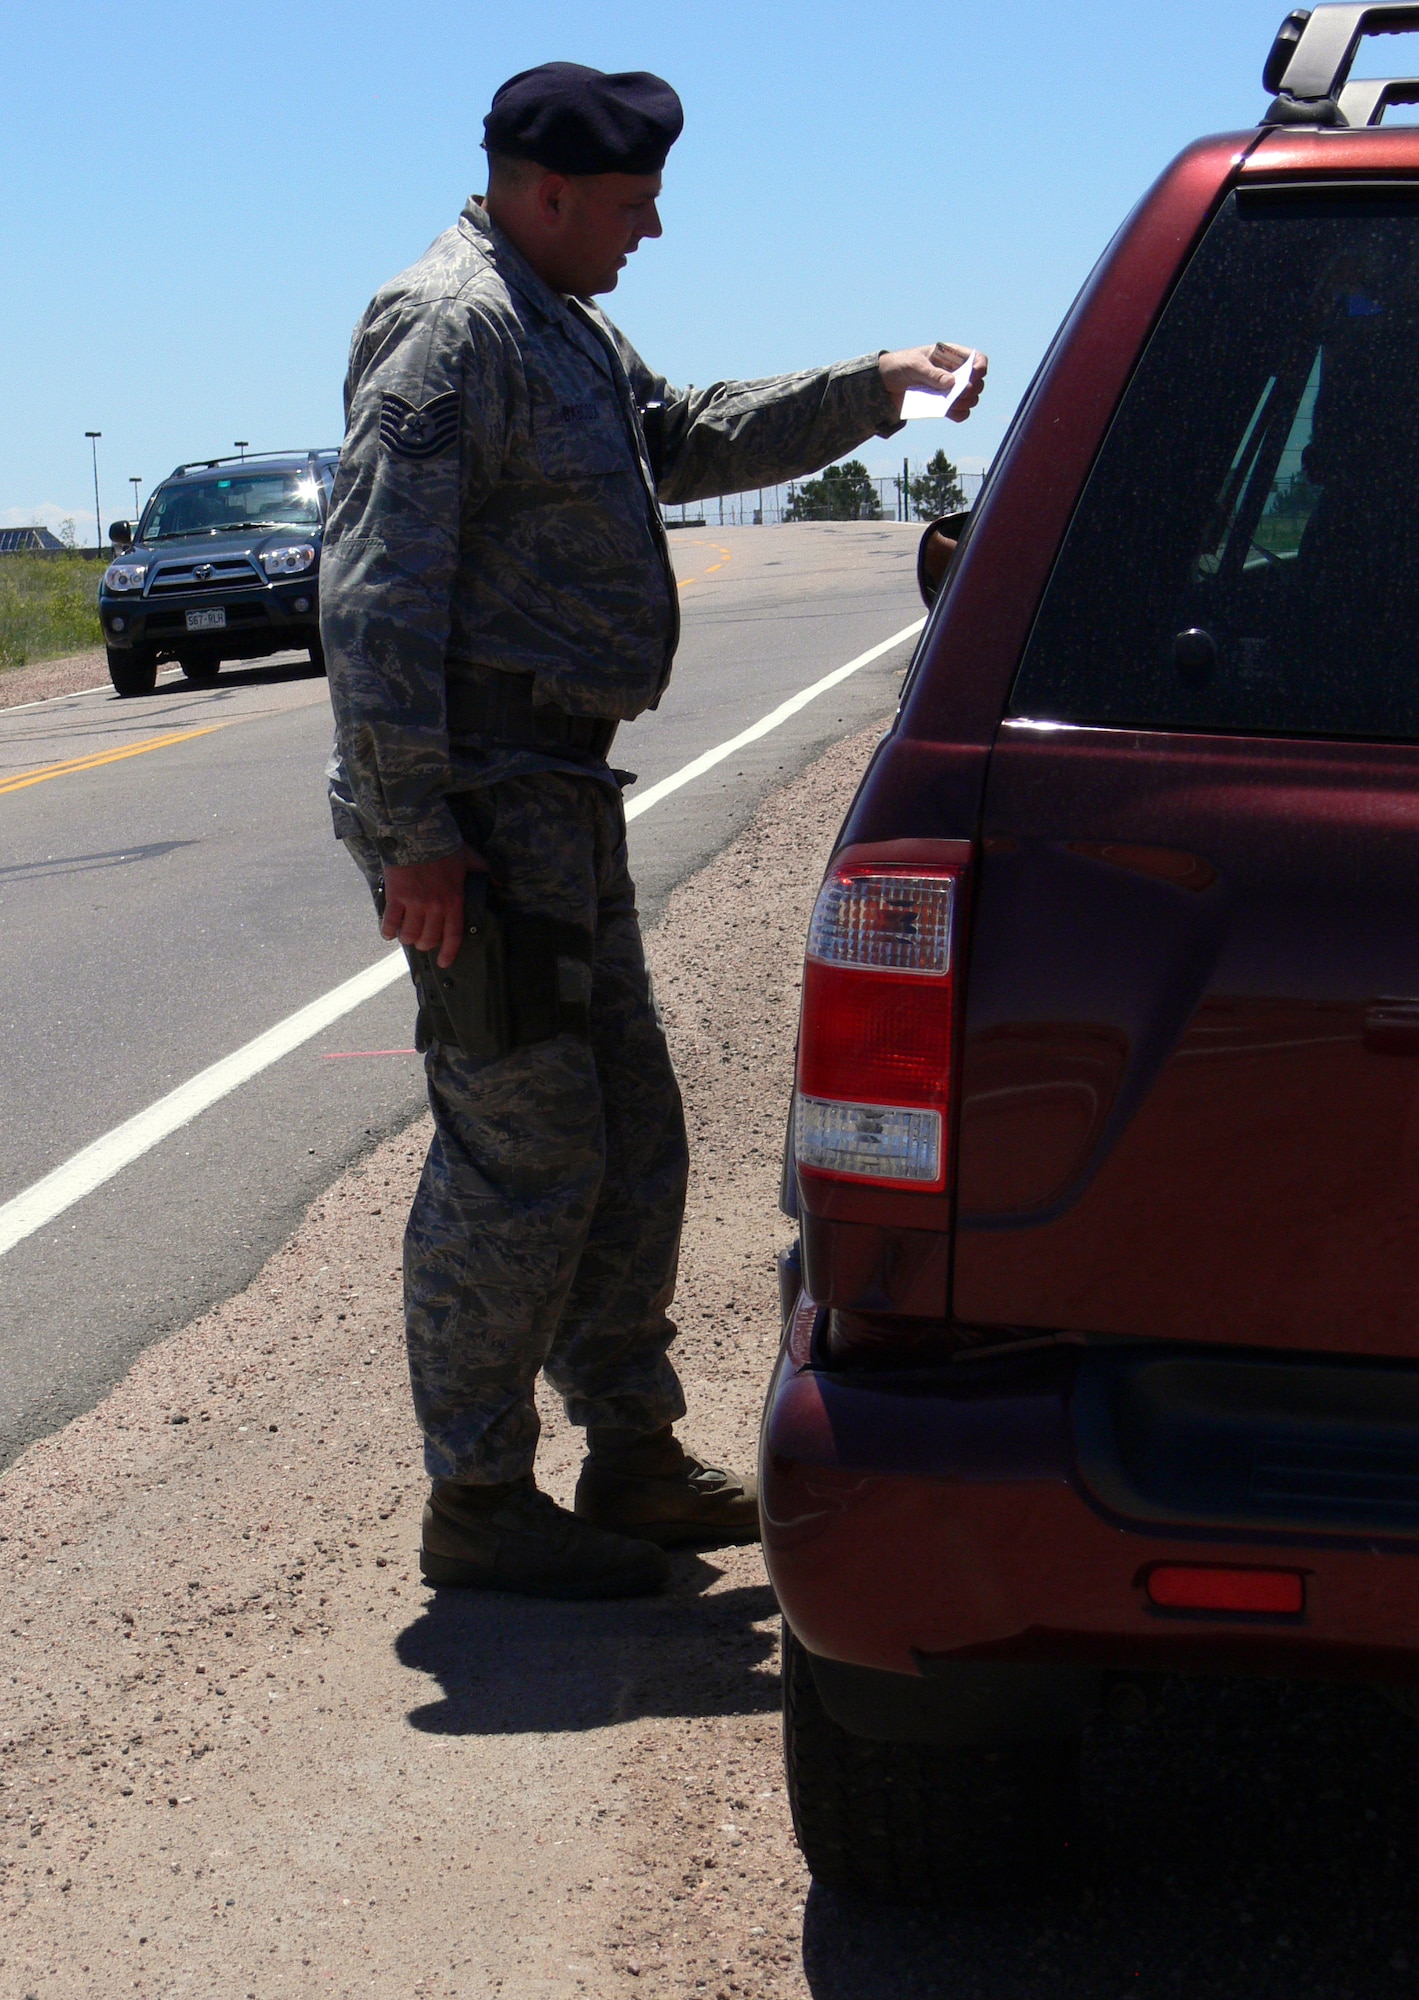 Tech. Sgt. Jeremy Babcock, 21st Security Forces Squadron, looks at the ID of a driver he stopped for speeding on Stewart Avenue June 15. The 21st SFS has stepped up traffic control as part of its integrated defense plan, which calls for higher visibility on and around the base. (U.S. Air Force photo/Monica Mendoza)